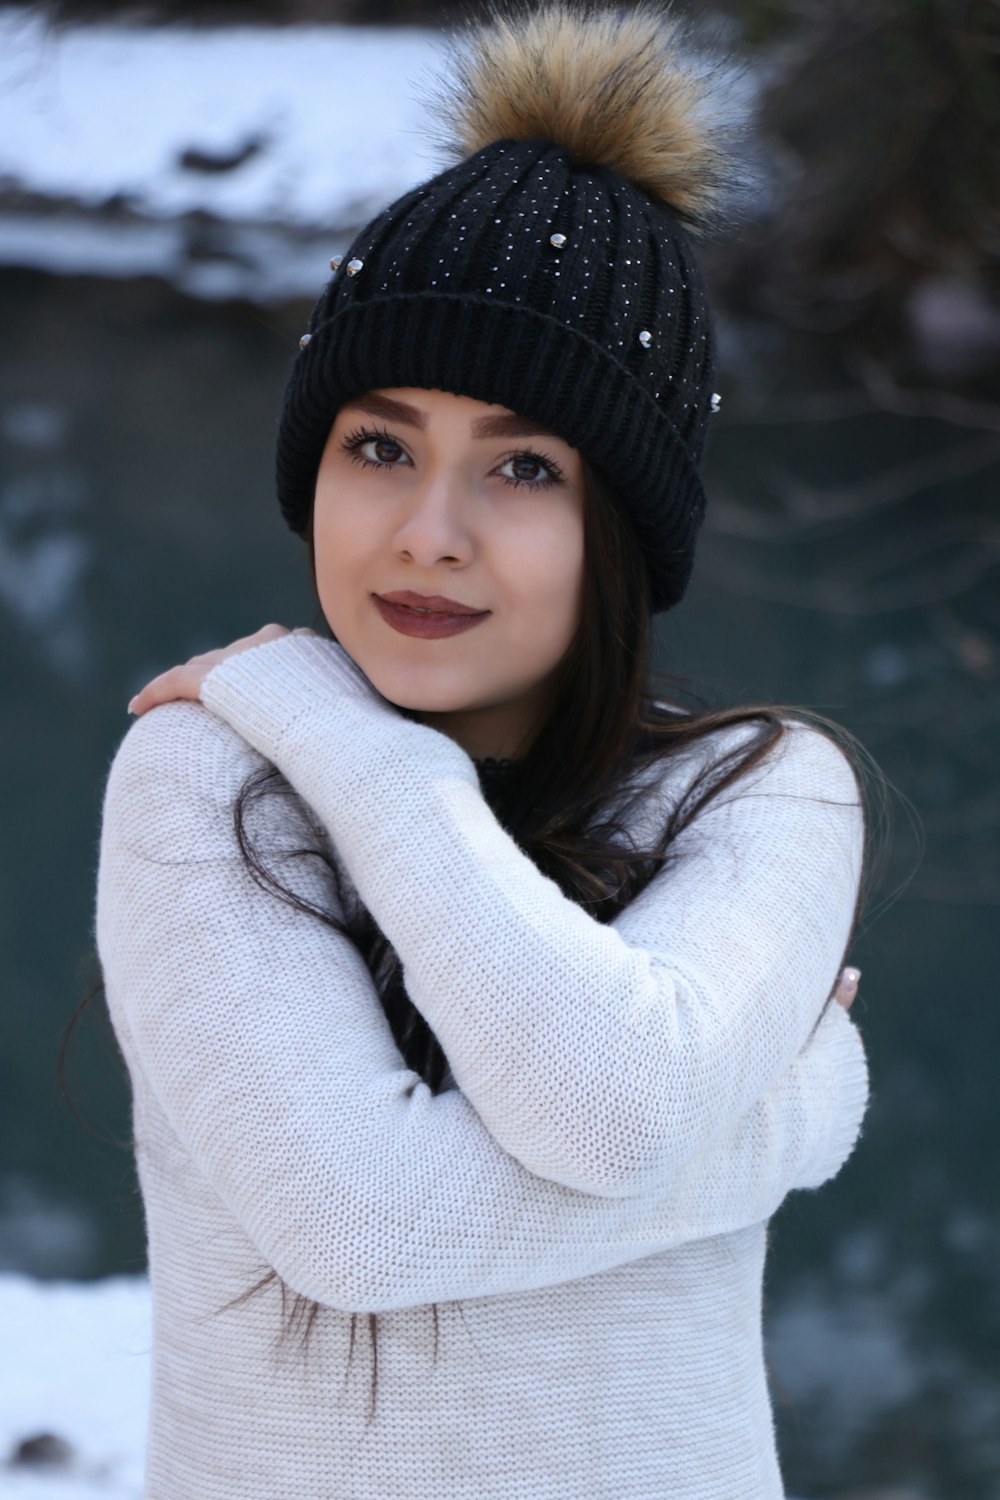 woman in white knit sweater and black knit cap